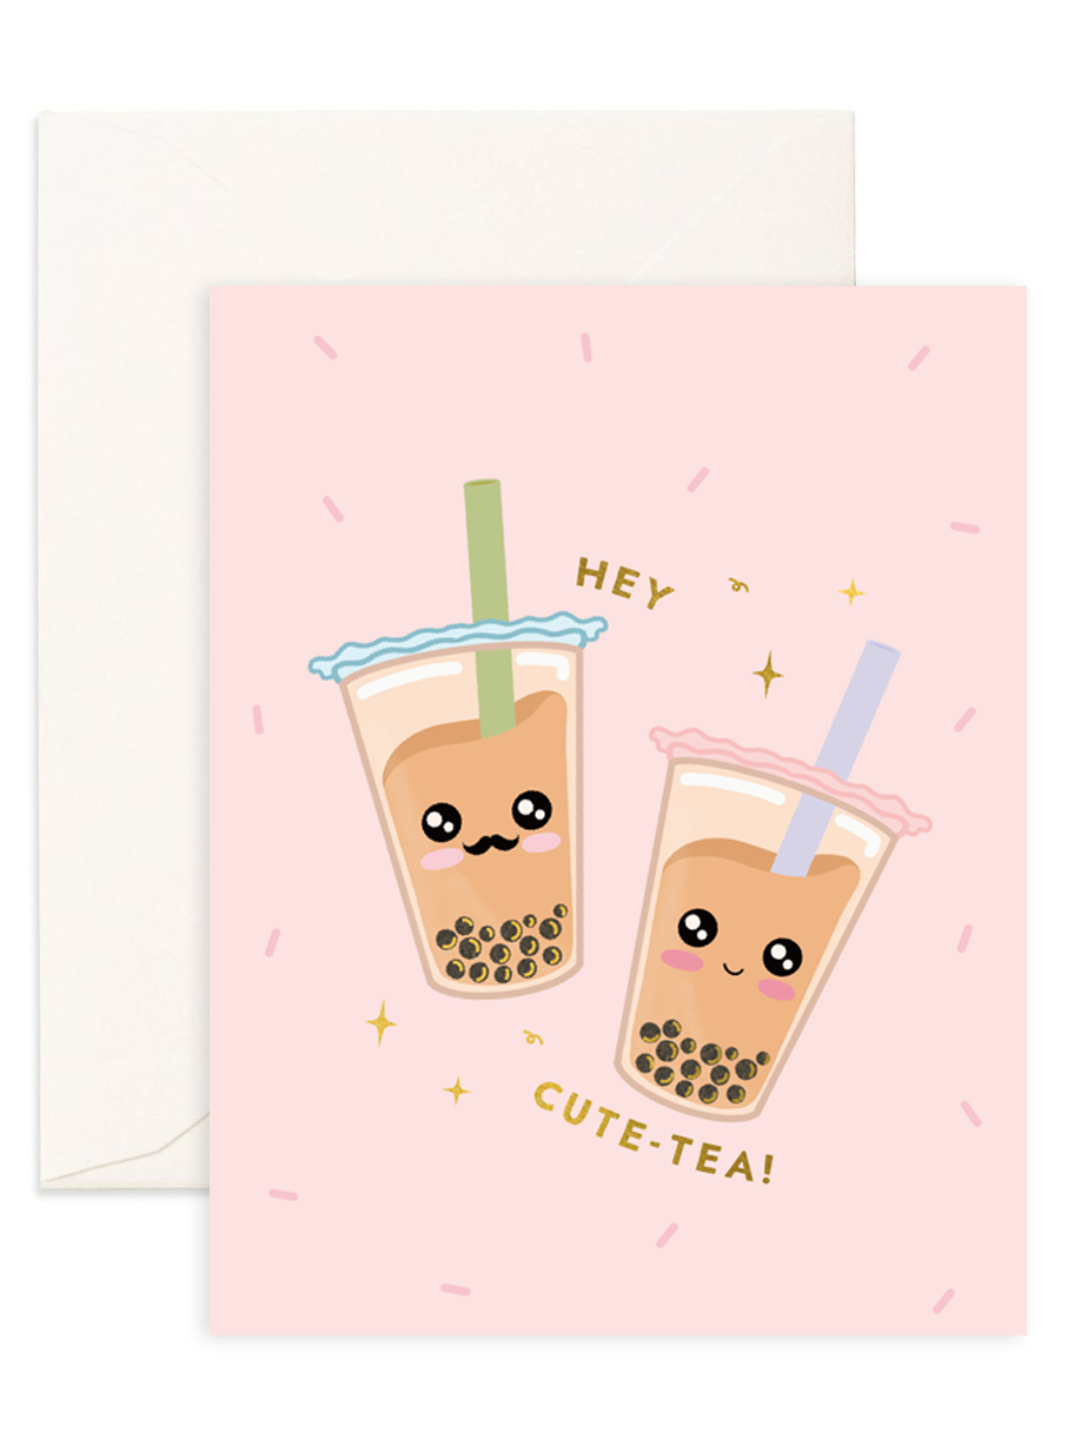 Eco-friendly greeting card printed on recycled paper cute food-inspired design shop sustainable ethical brands women-owned brands kind on the planet bubble tea